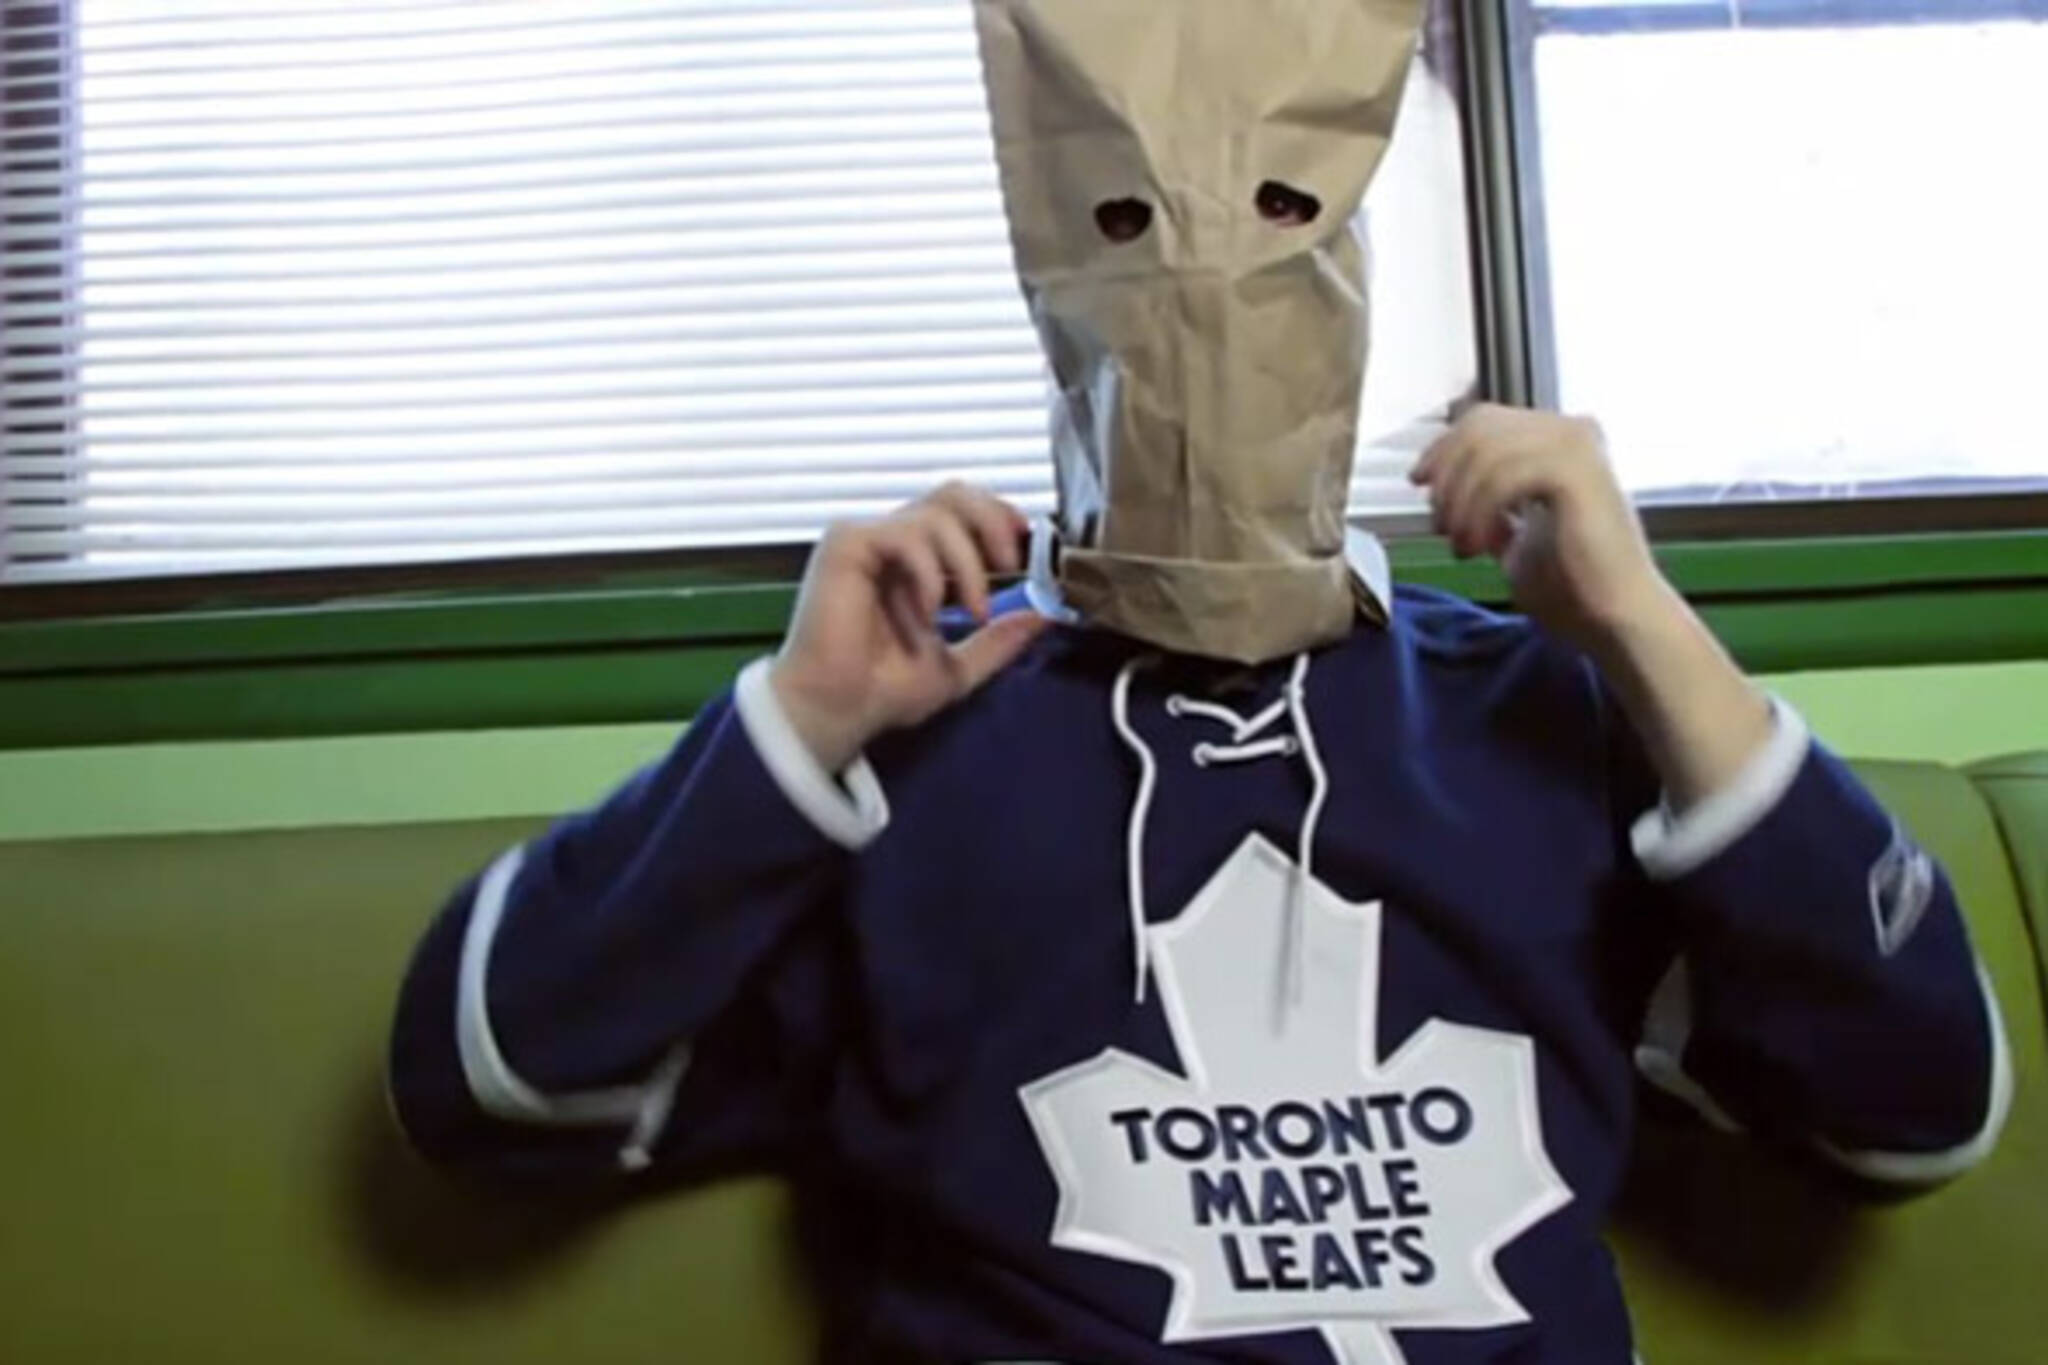 Leafs Habs YouTube Video